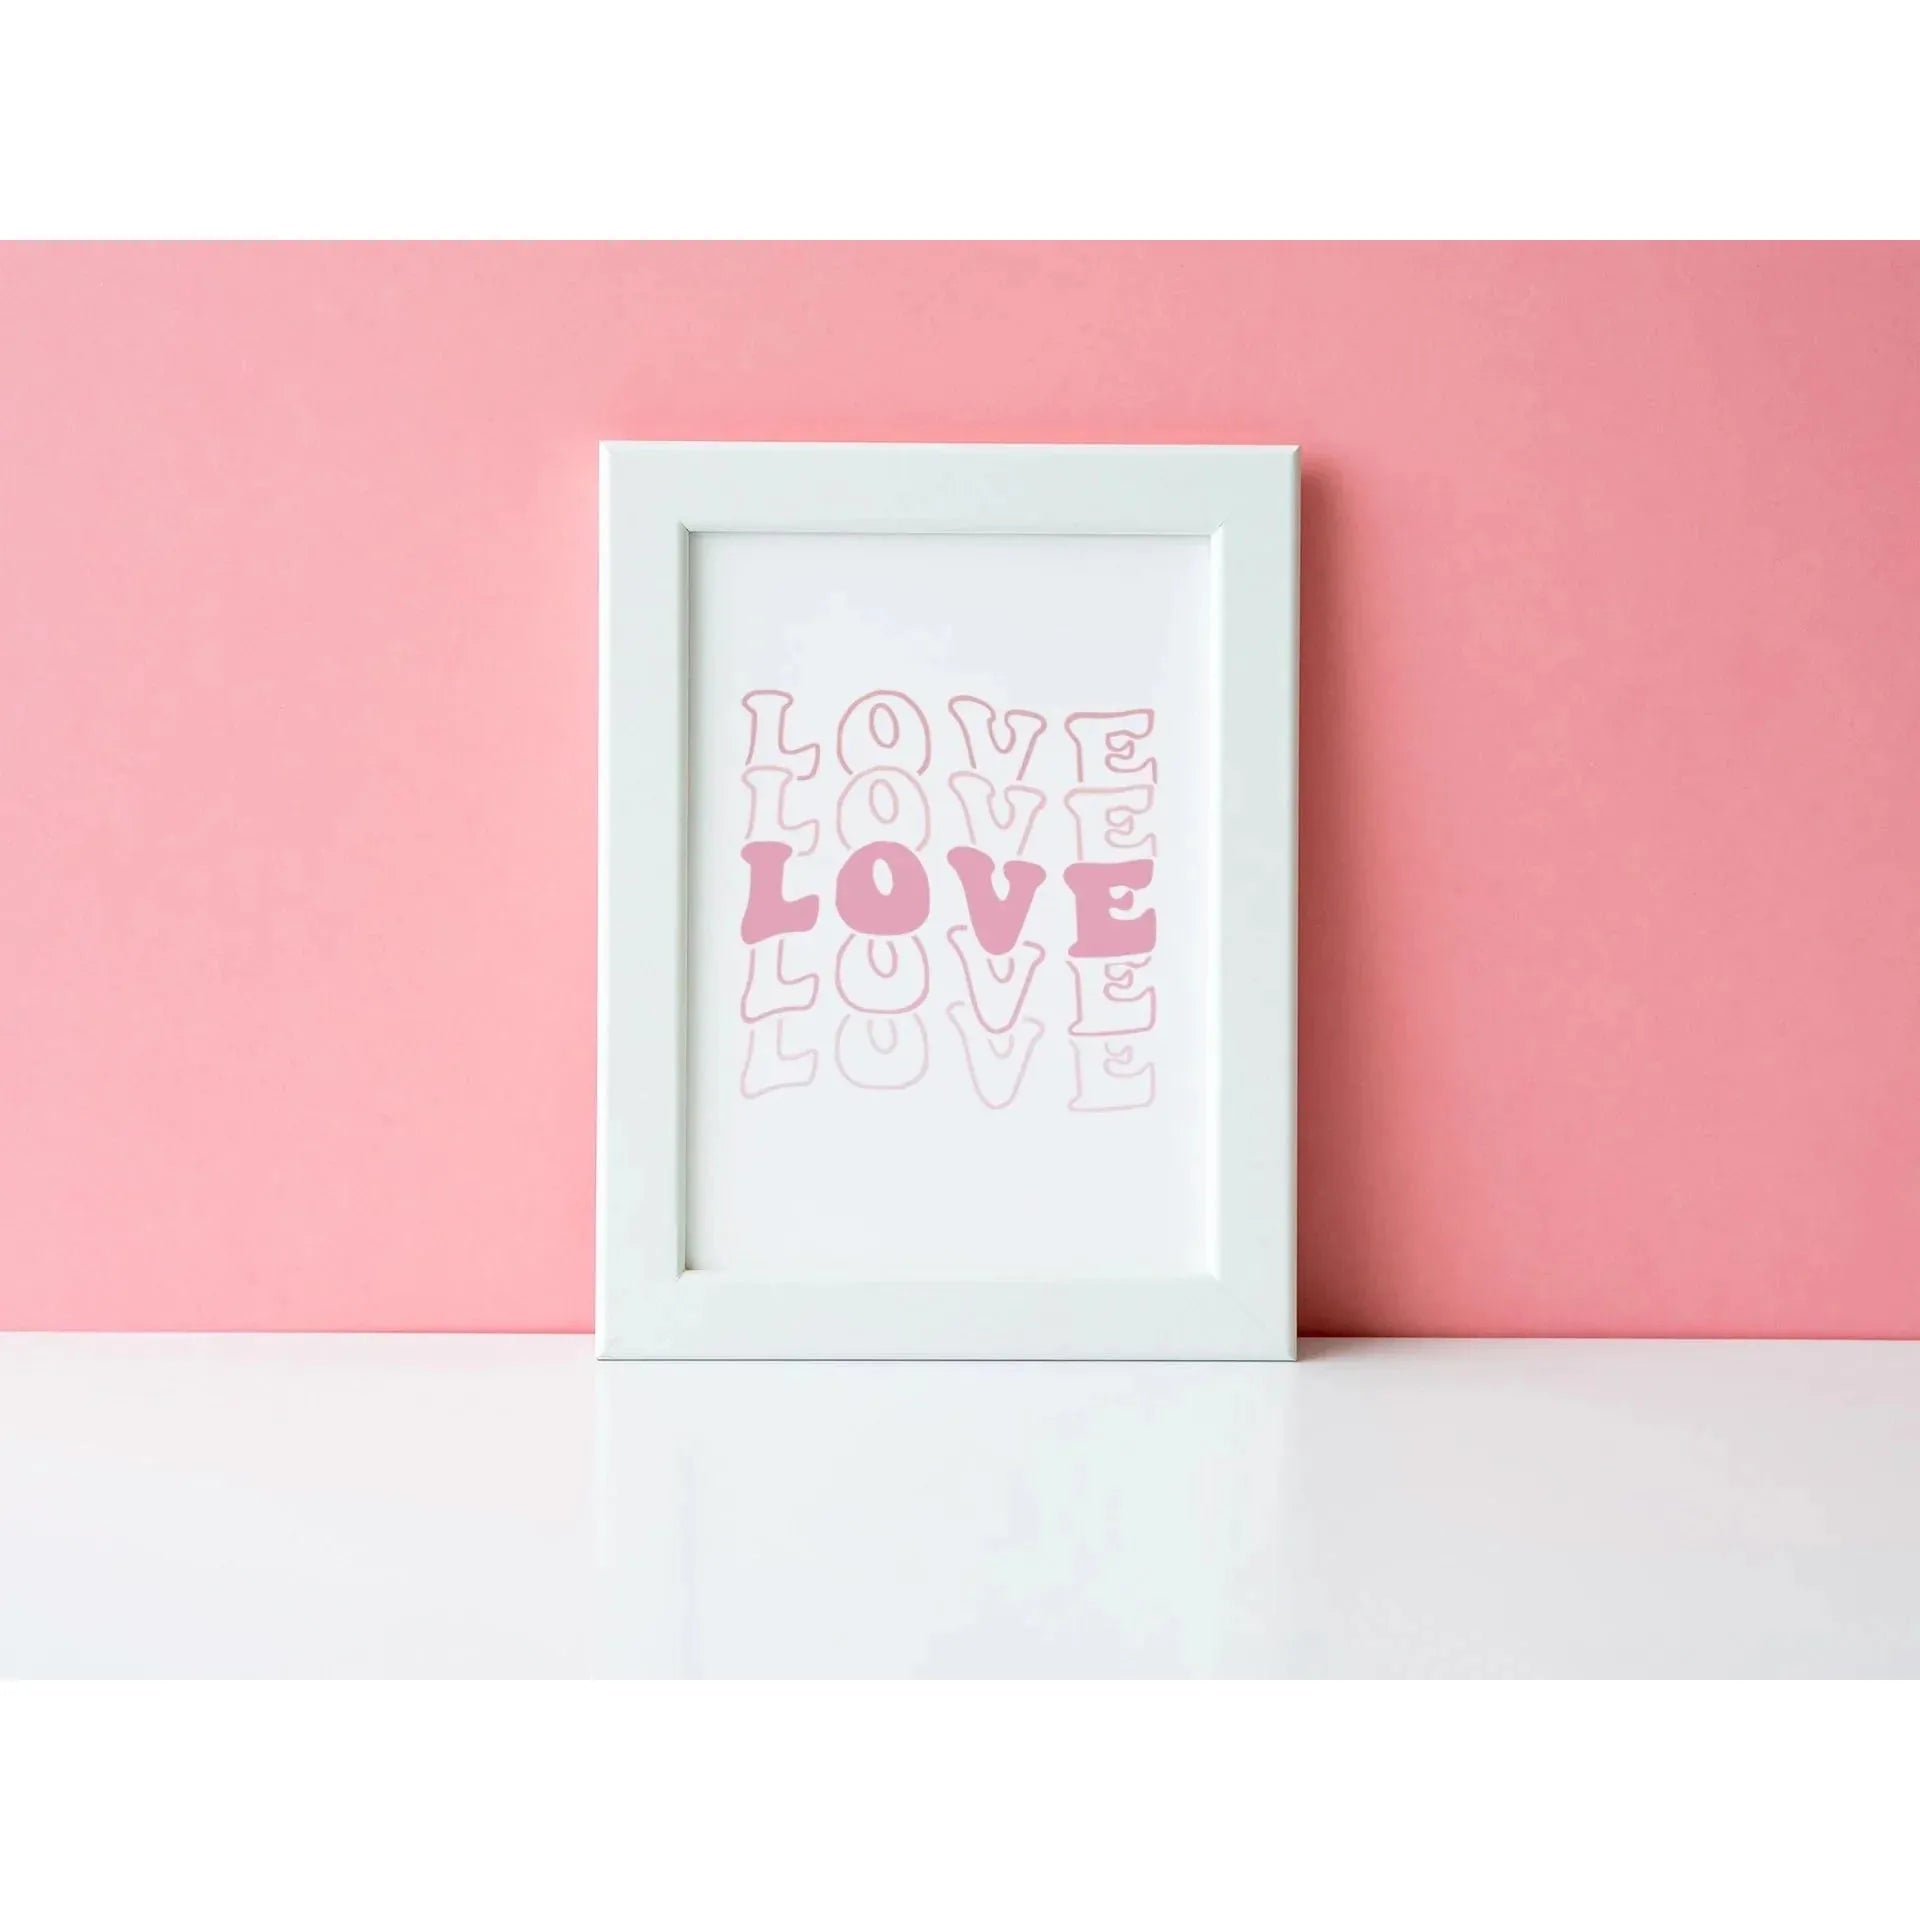 WinsterCreations™ Official Store Love Love Love Valentine's Day Home Wall Decor Print by WinsterCreations™ Official Store